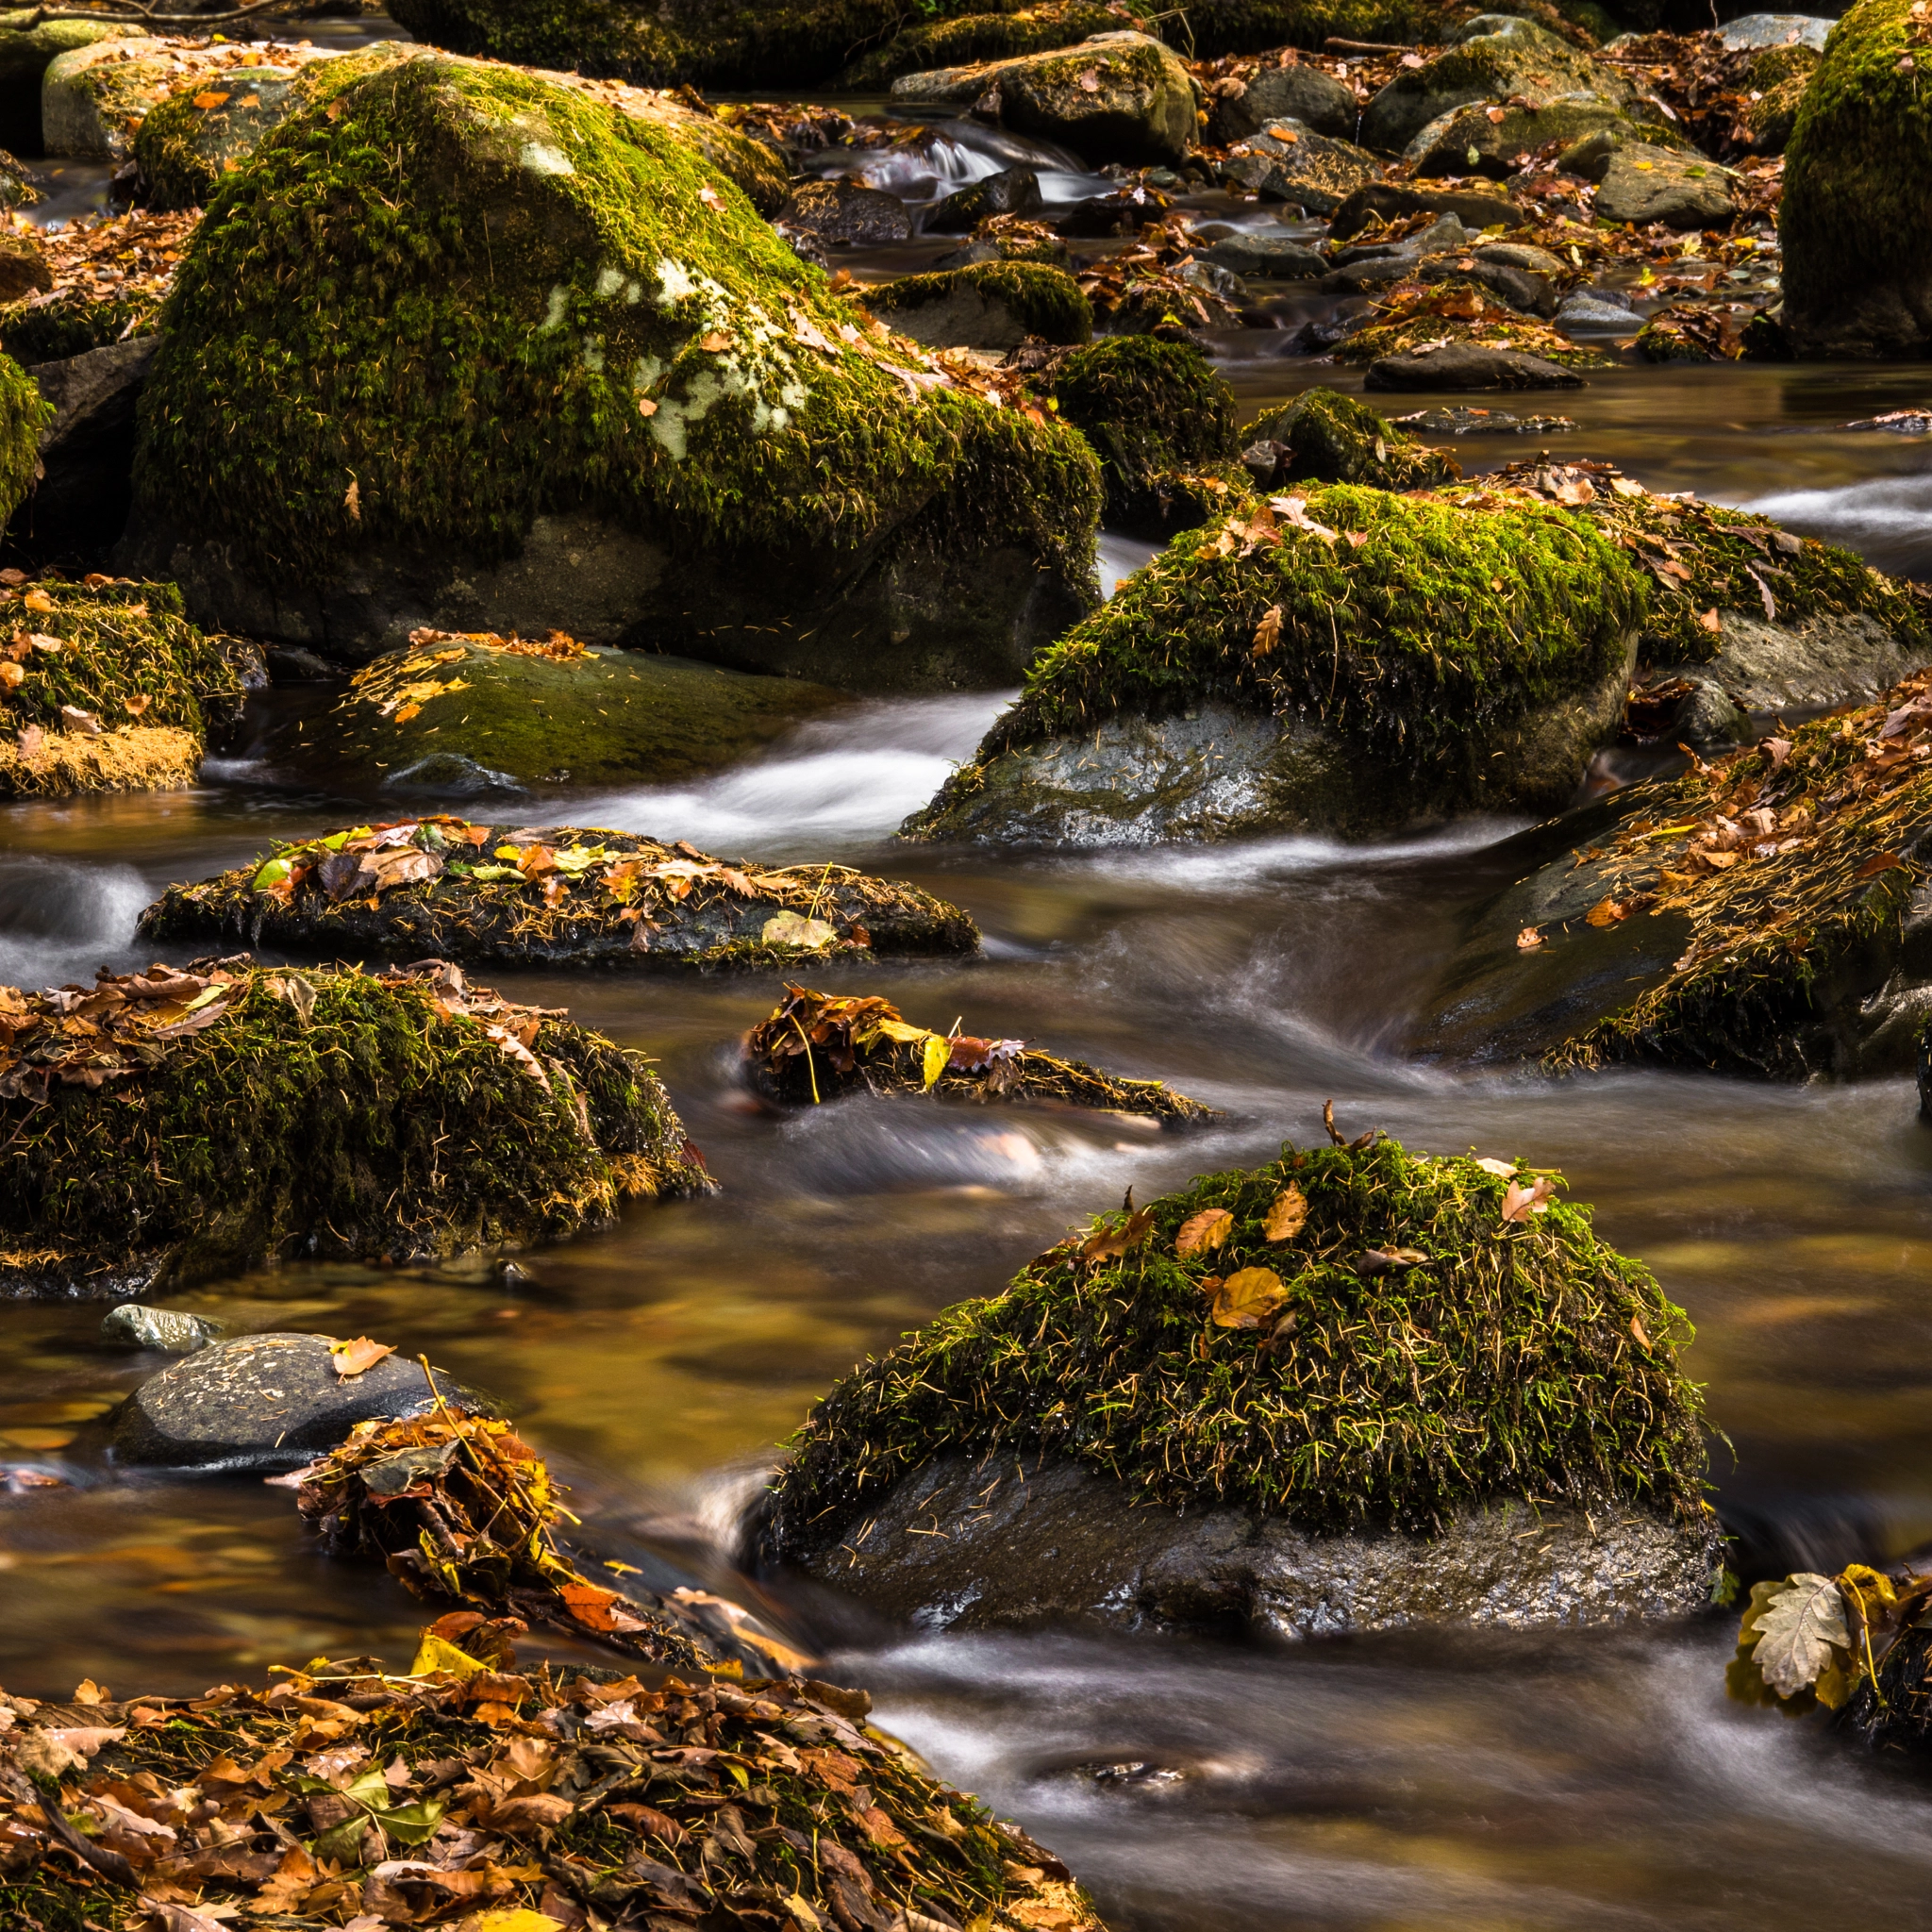 Canon EOS 7D Mark II + Sigma 24-105mm f/4 DG OS HSM | A sample photo. Water and rocks photography